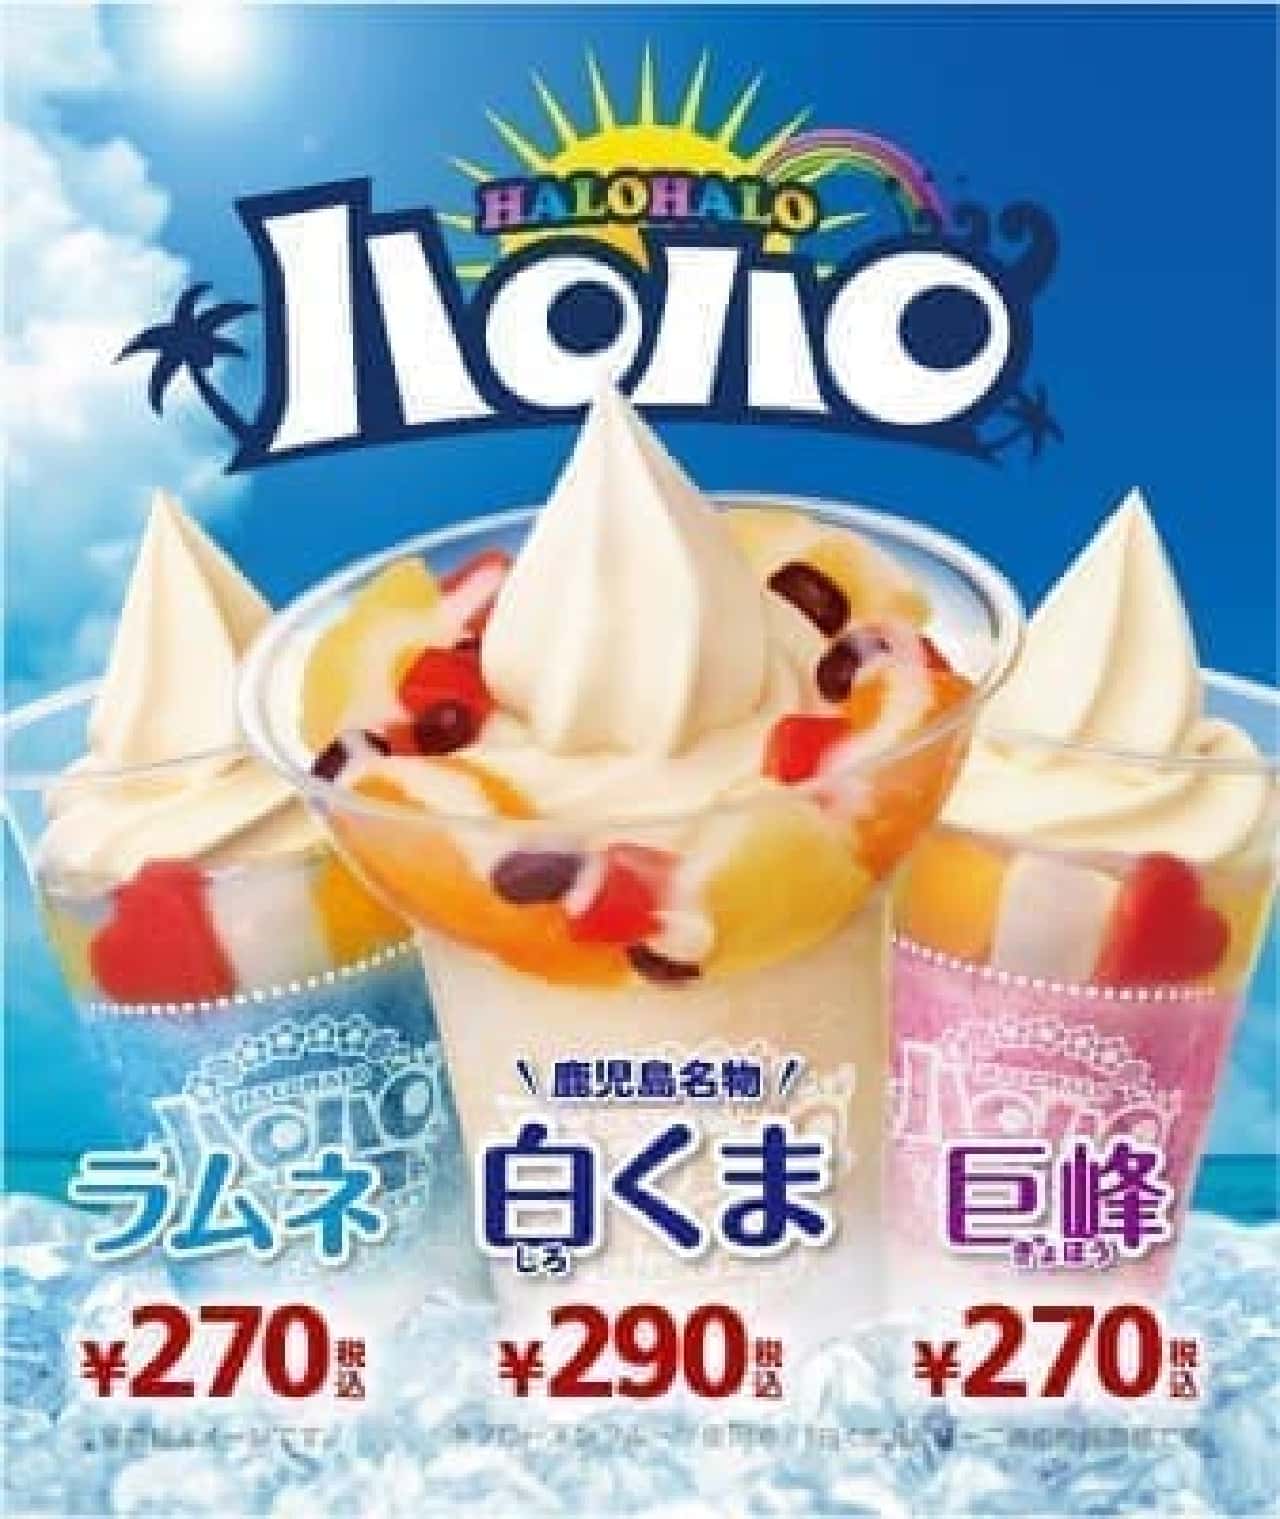 Summer sweets "Halo-halo" will be released again this year!